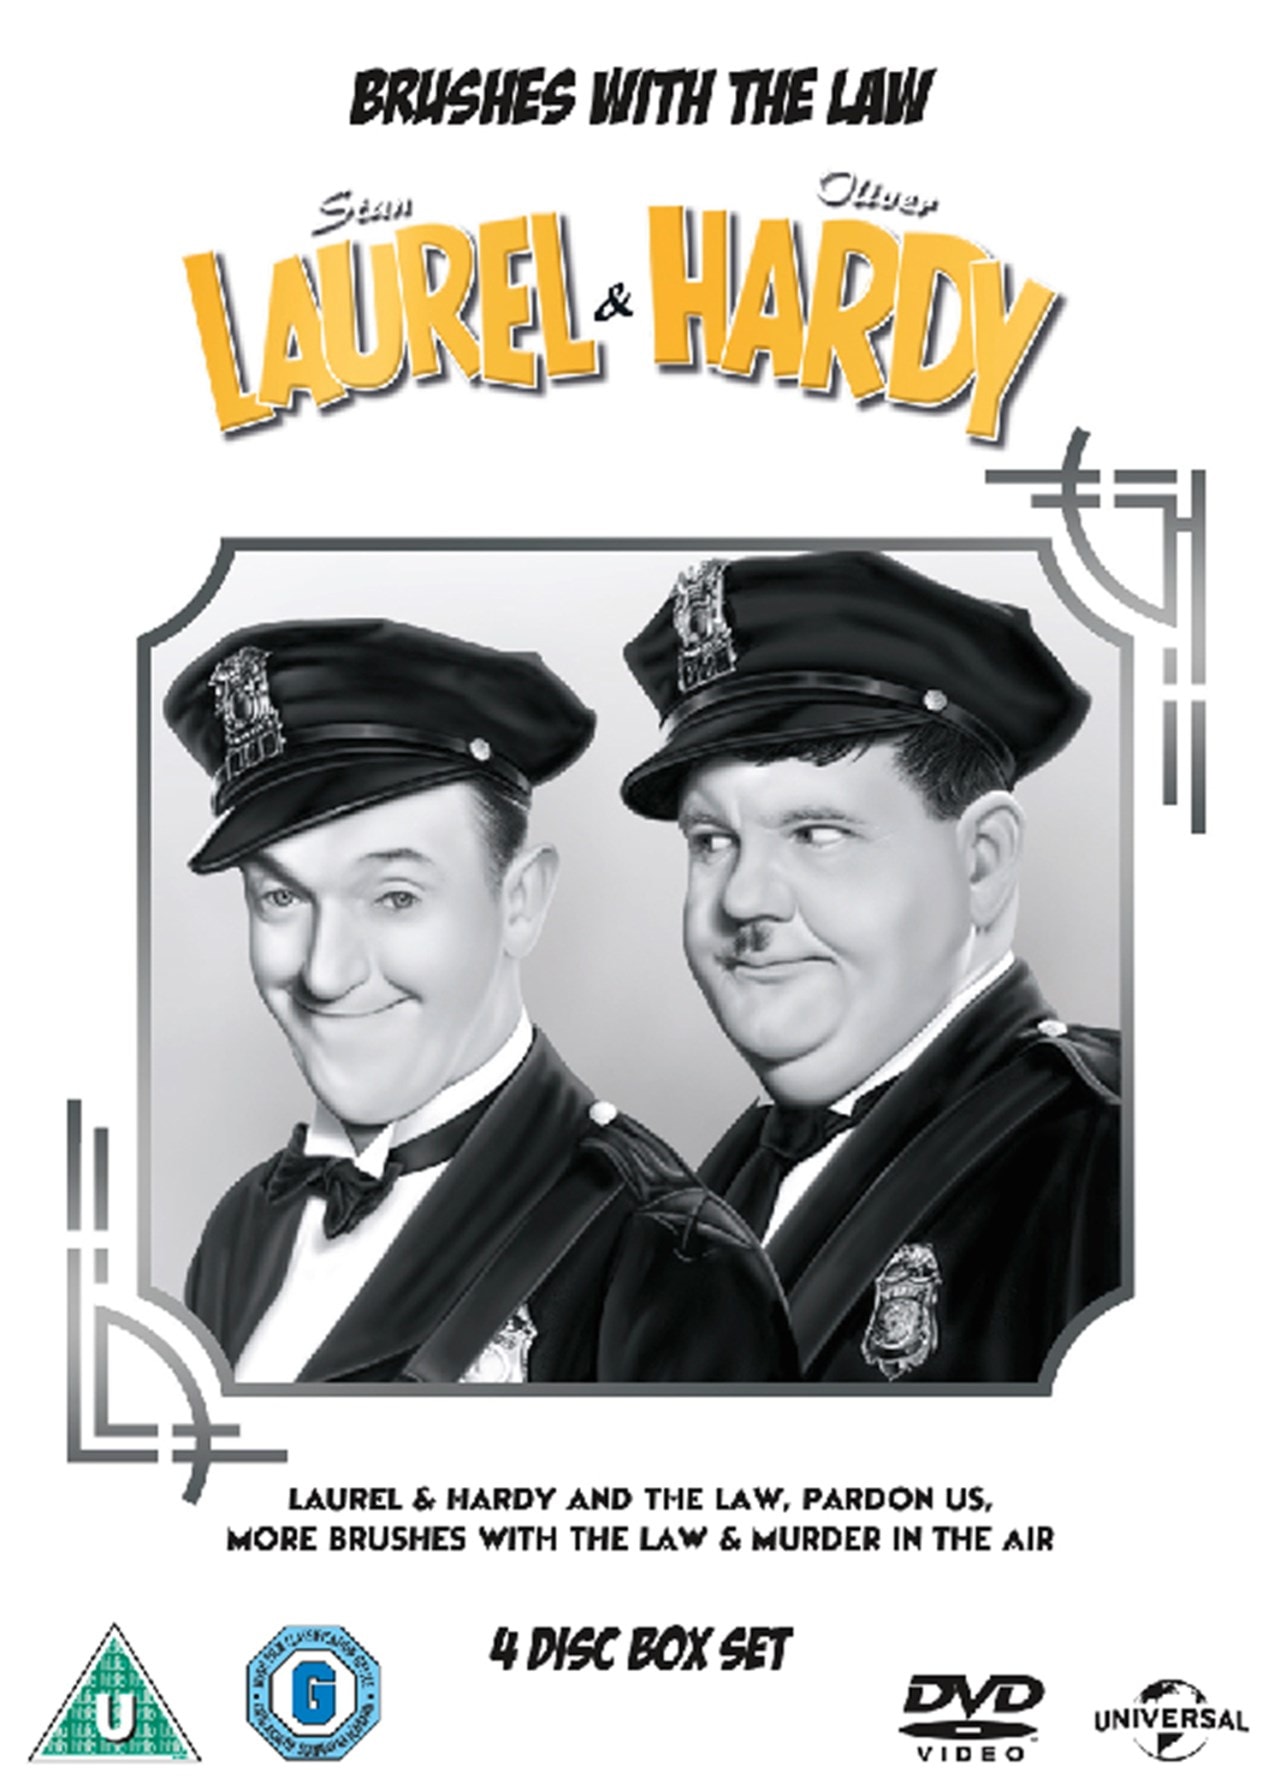 laurel and hardy collection dvd review